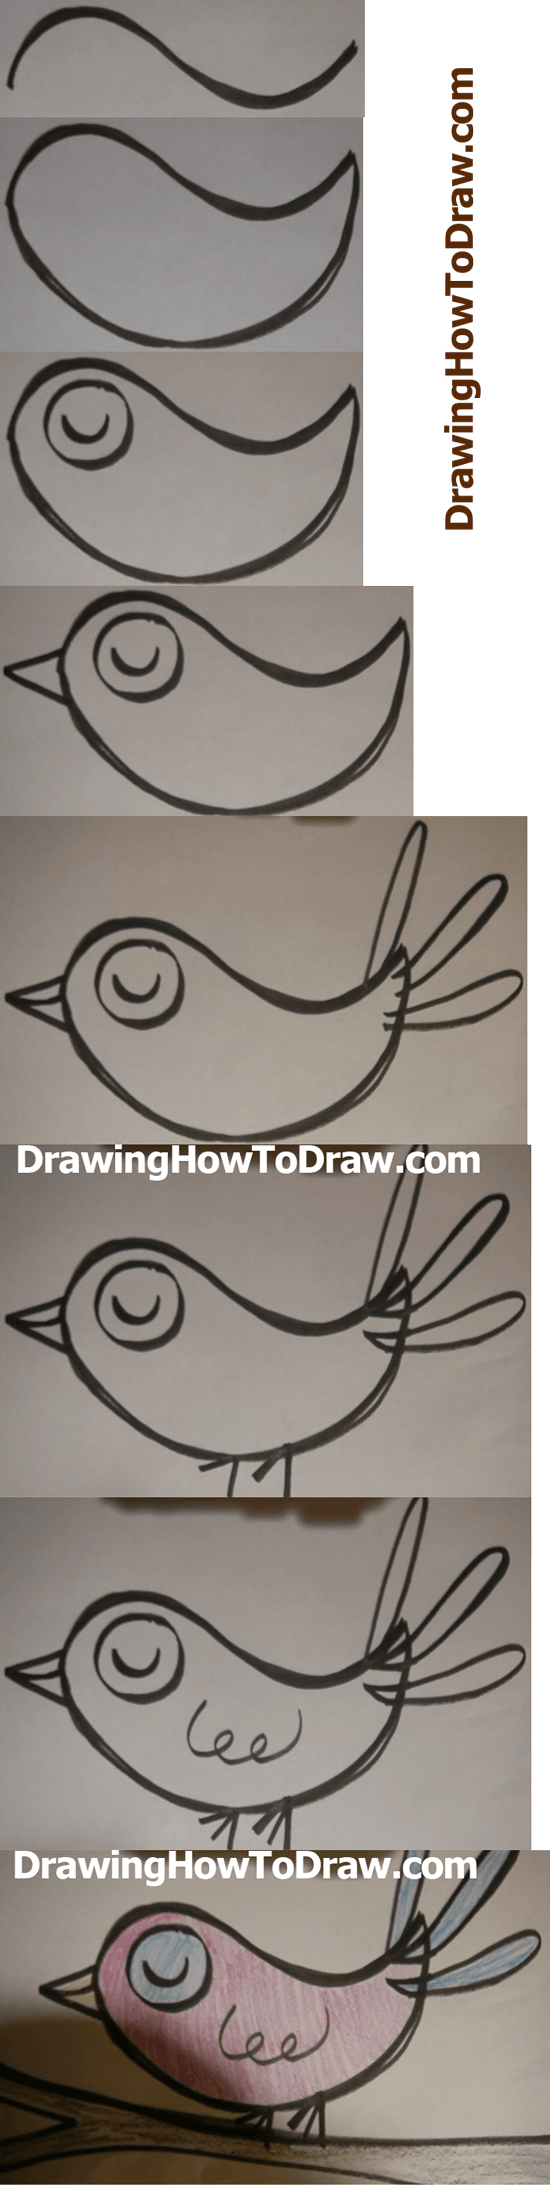 How to Draw Cartoon Birds Simple Step by Step Drawing Lesson for Children